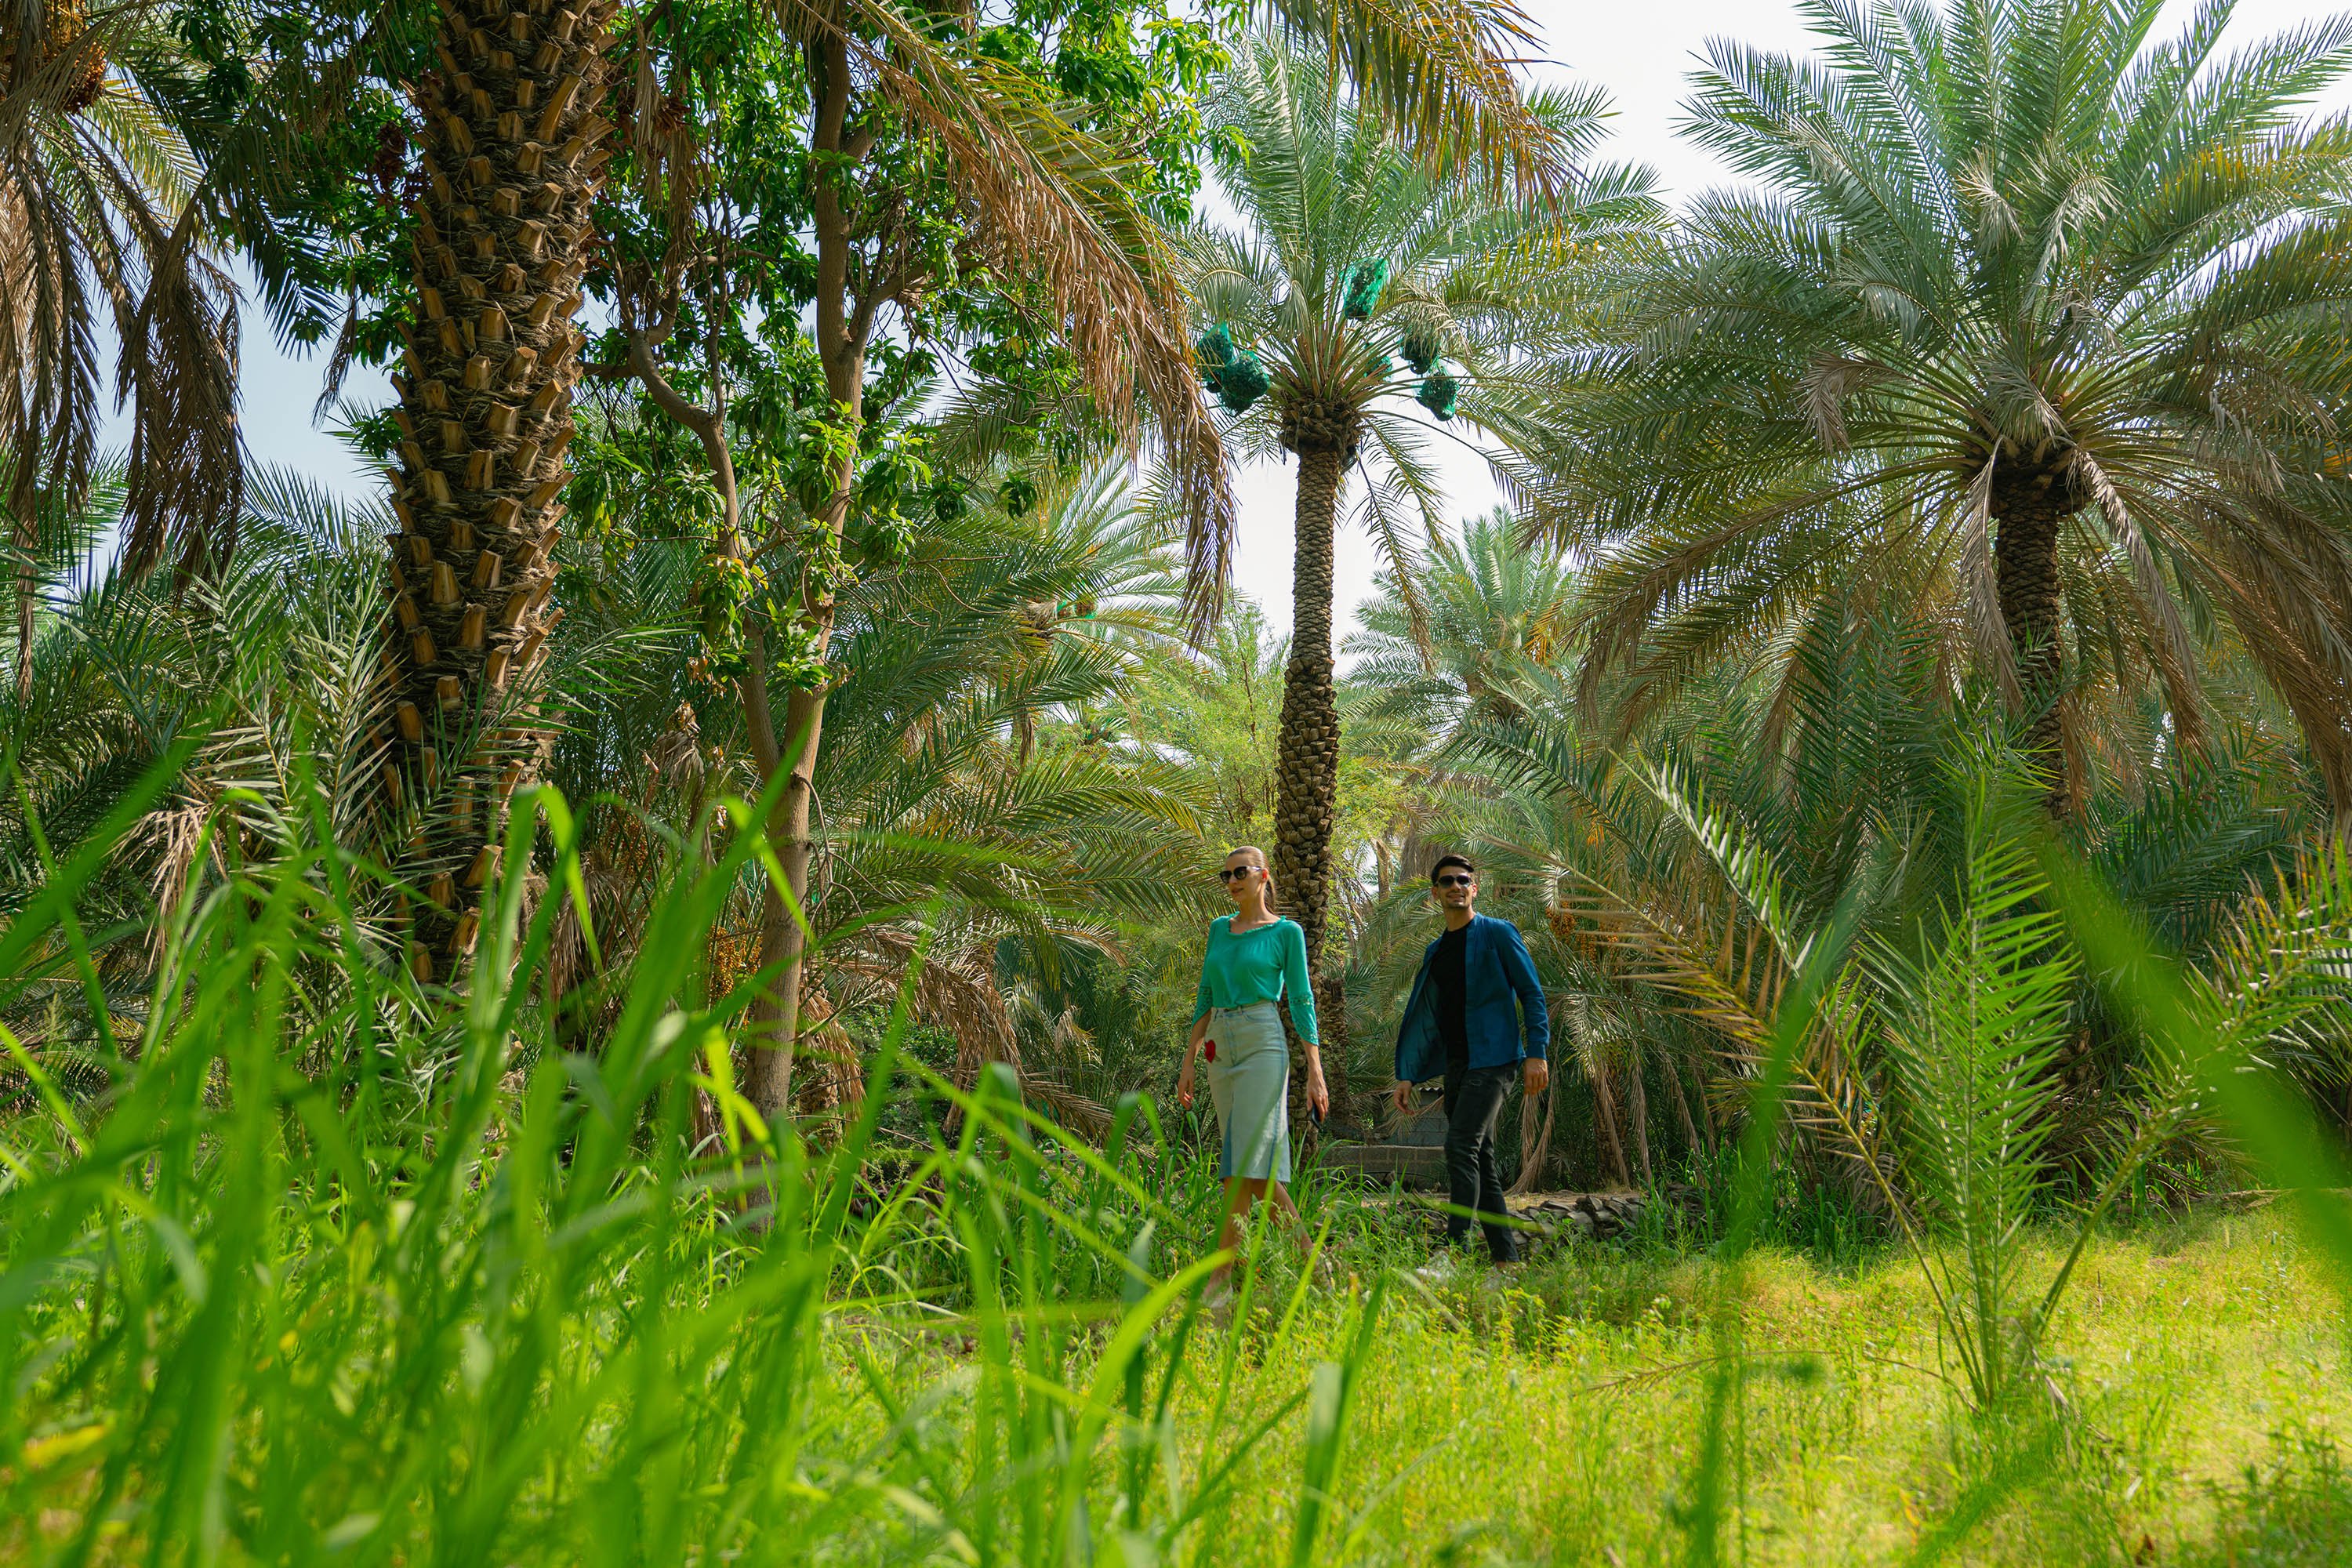 A couple taking a free walking tour in a lush landscape